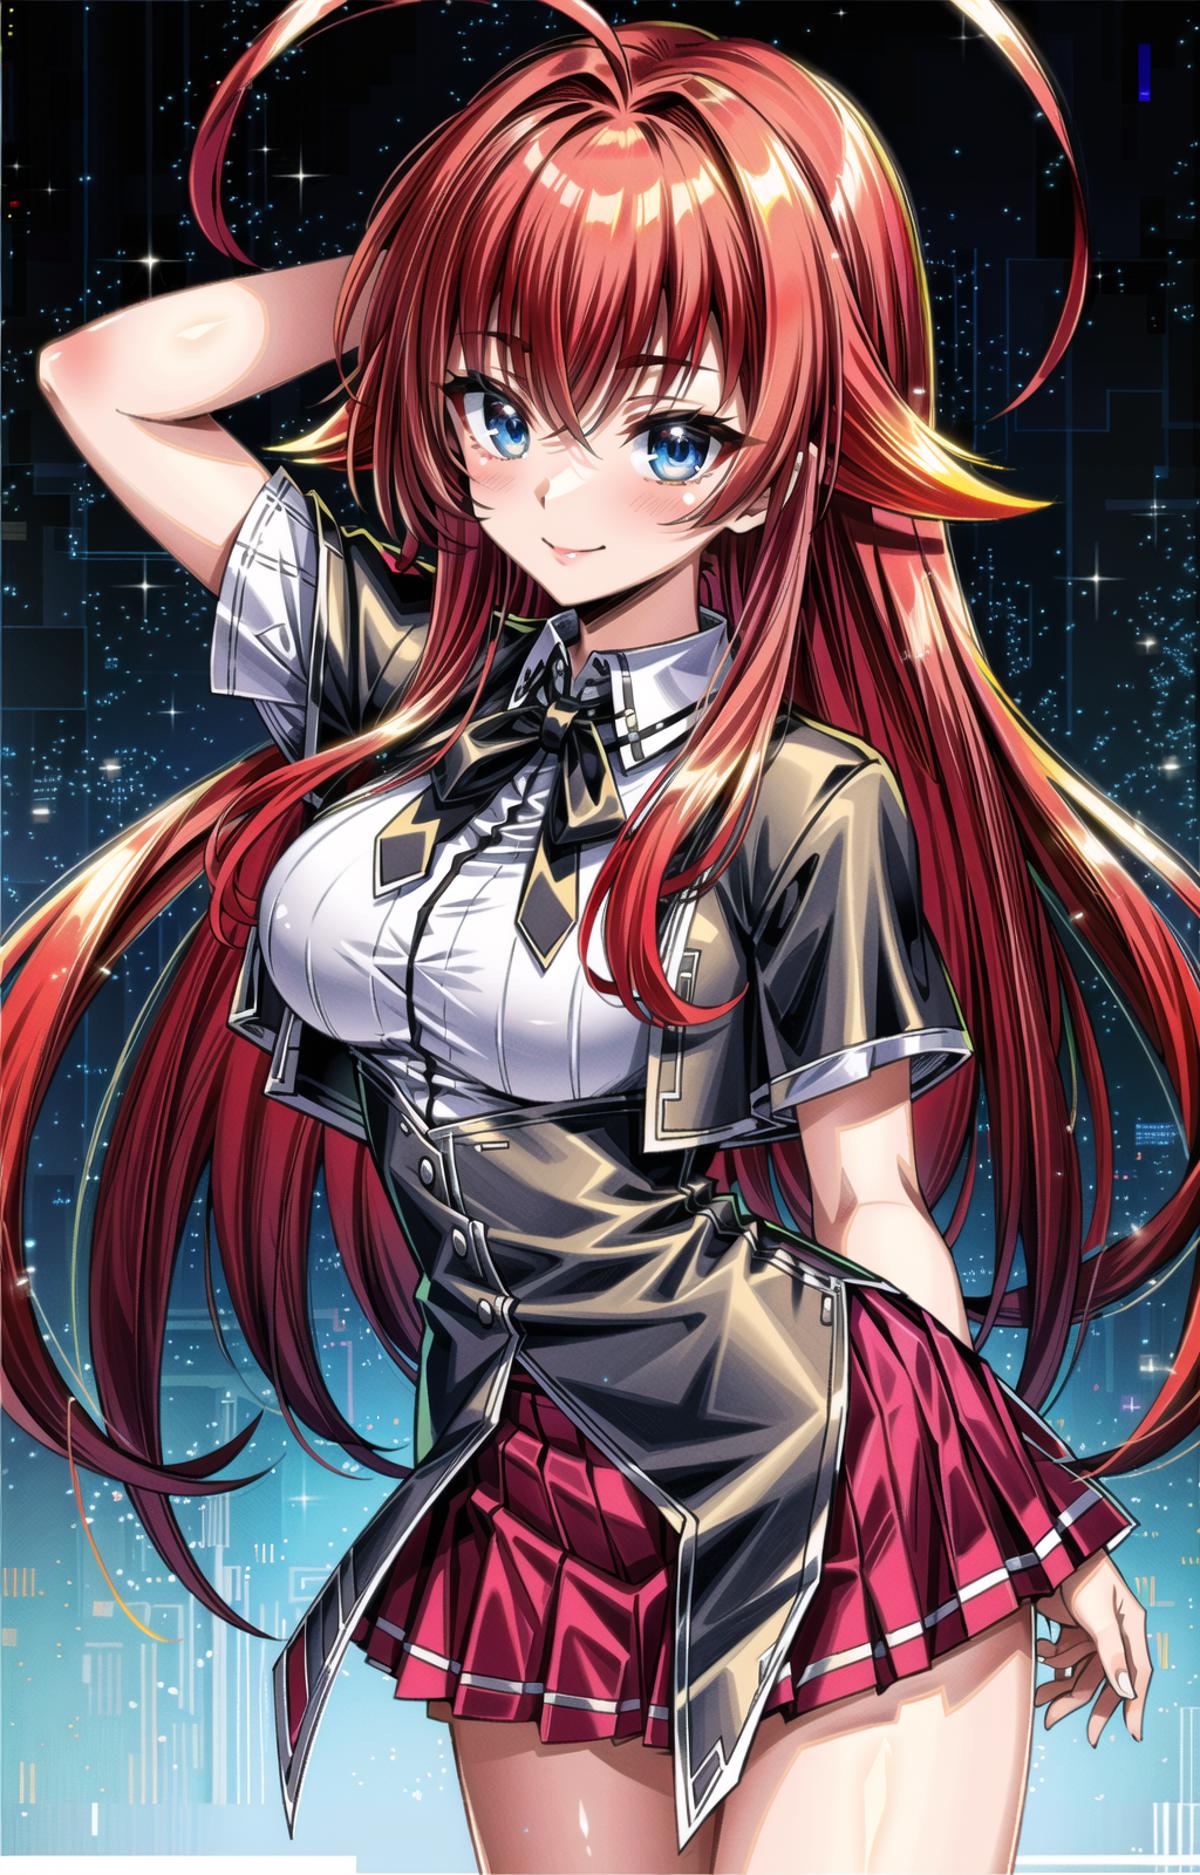 Rias Gremory リアス・グレモリー / High School D×D image by MrCluckYou